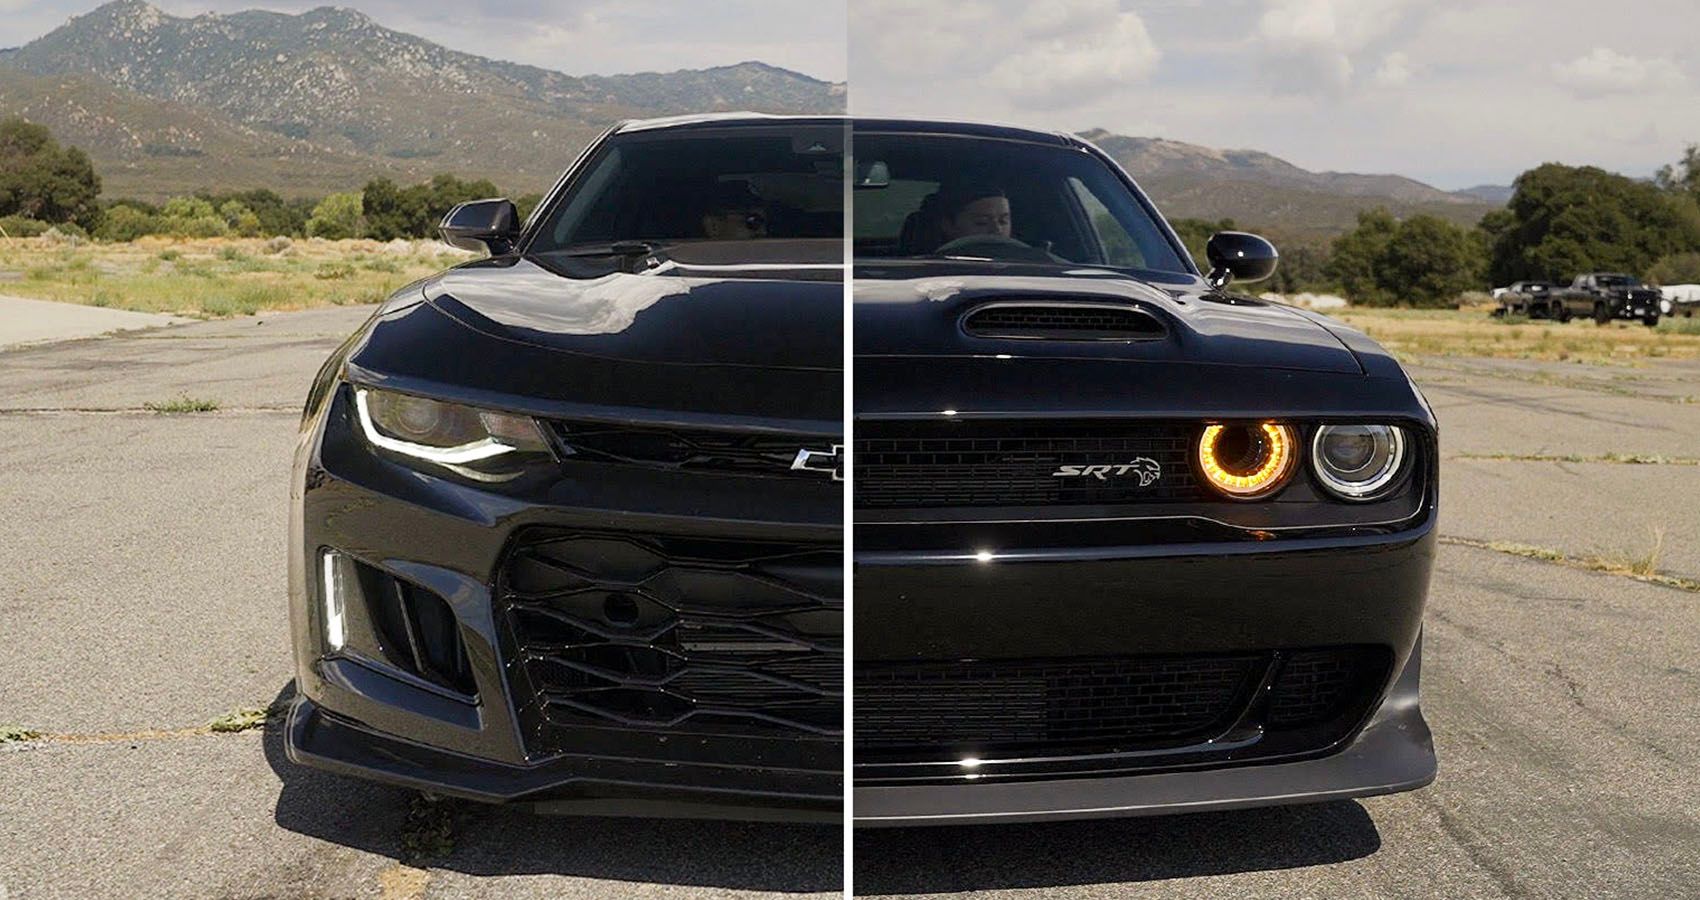 Chevy Camaro ZL1 And Dodge Challenger Hellcat Drag Race Has A Surprising  Result